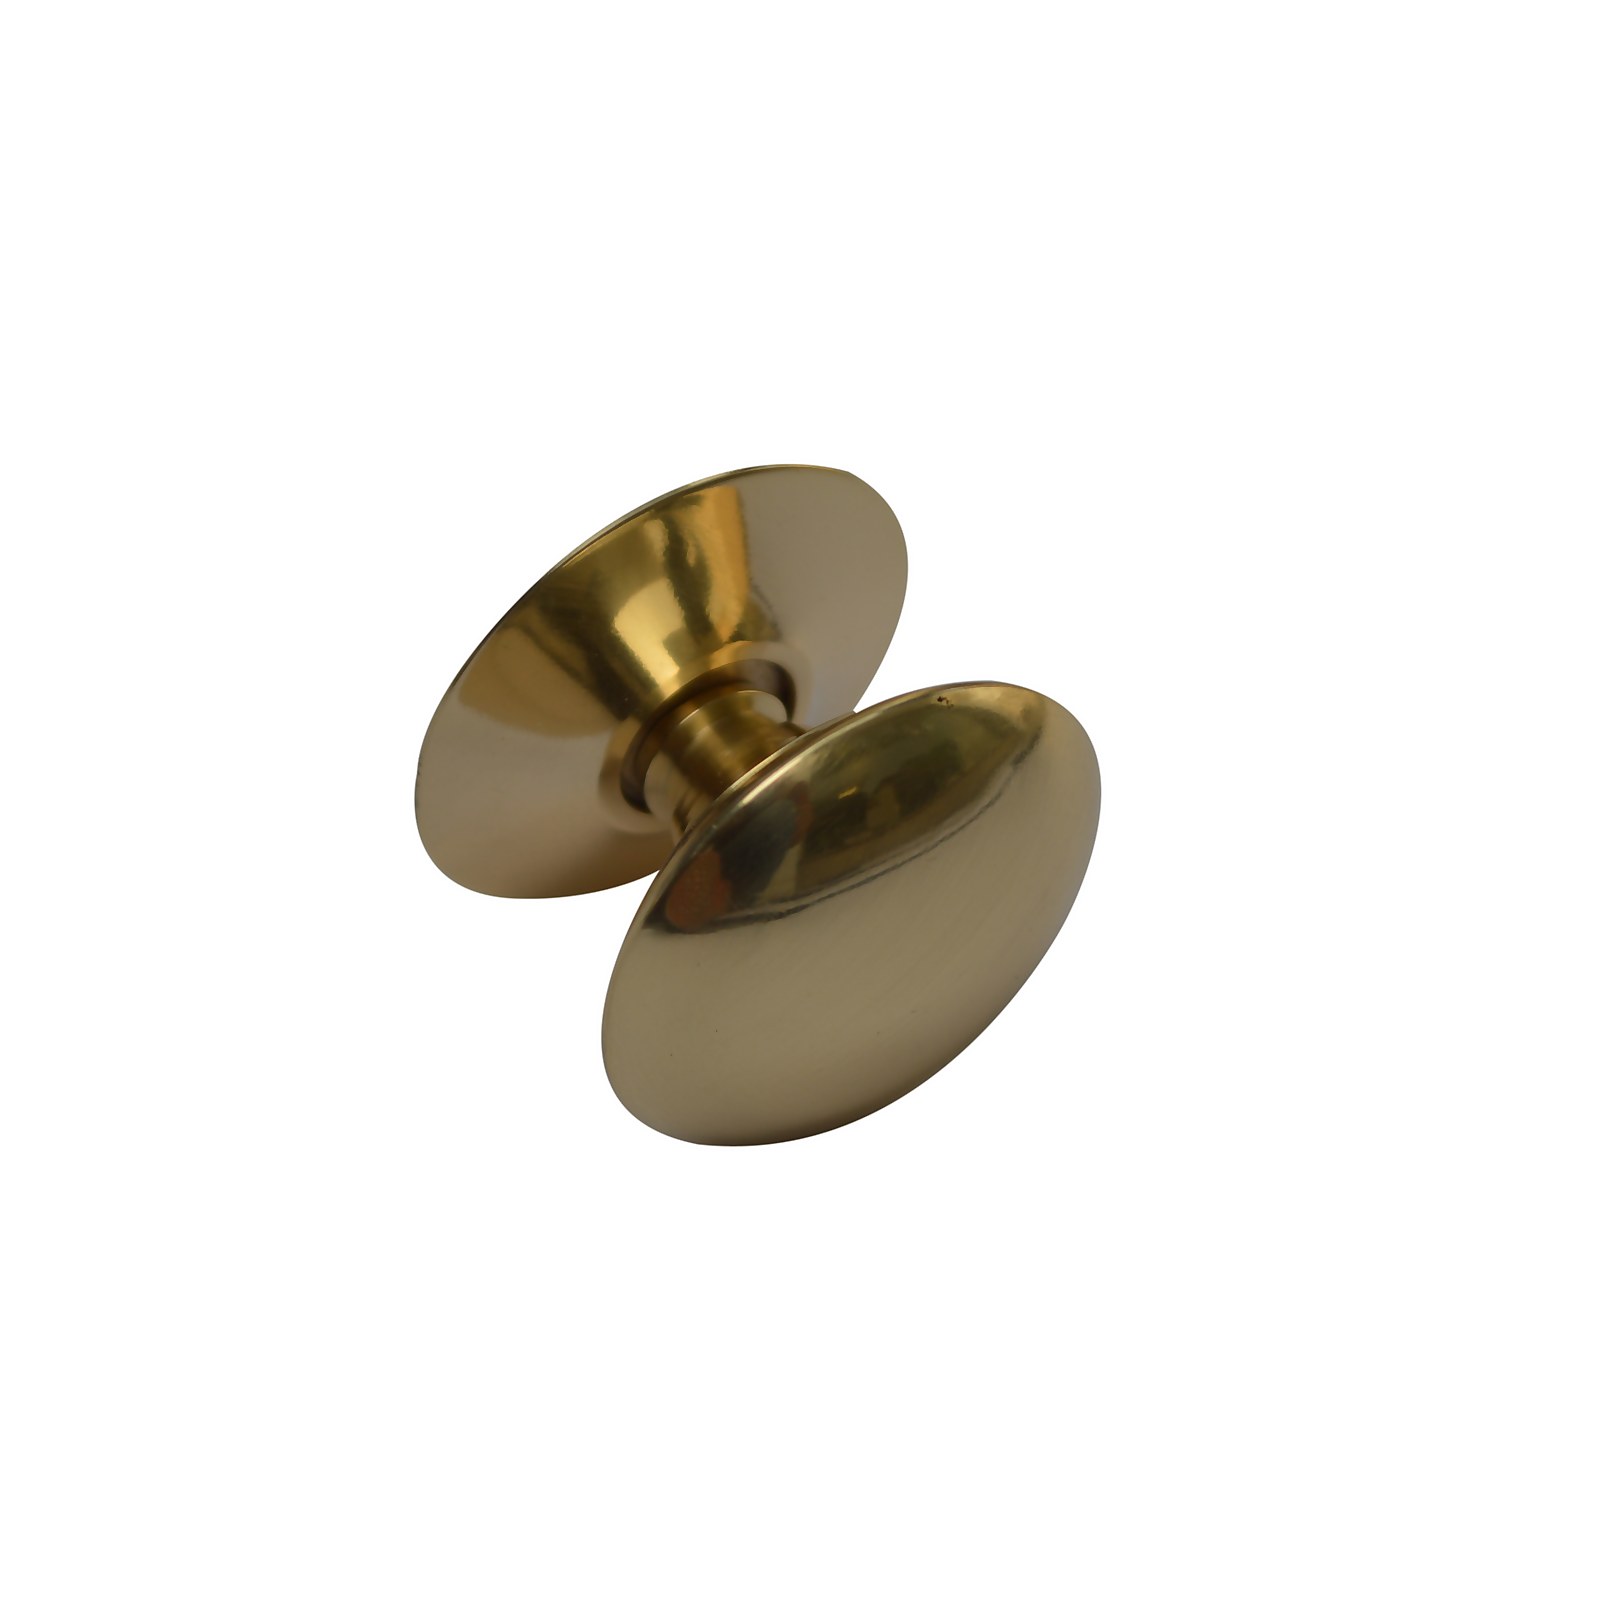 Photo of Victorian 30mm Polished Brass Cabinet Knob - 2 Pack